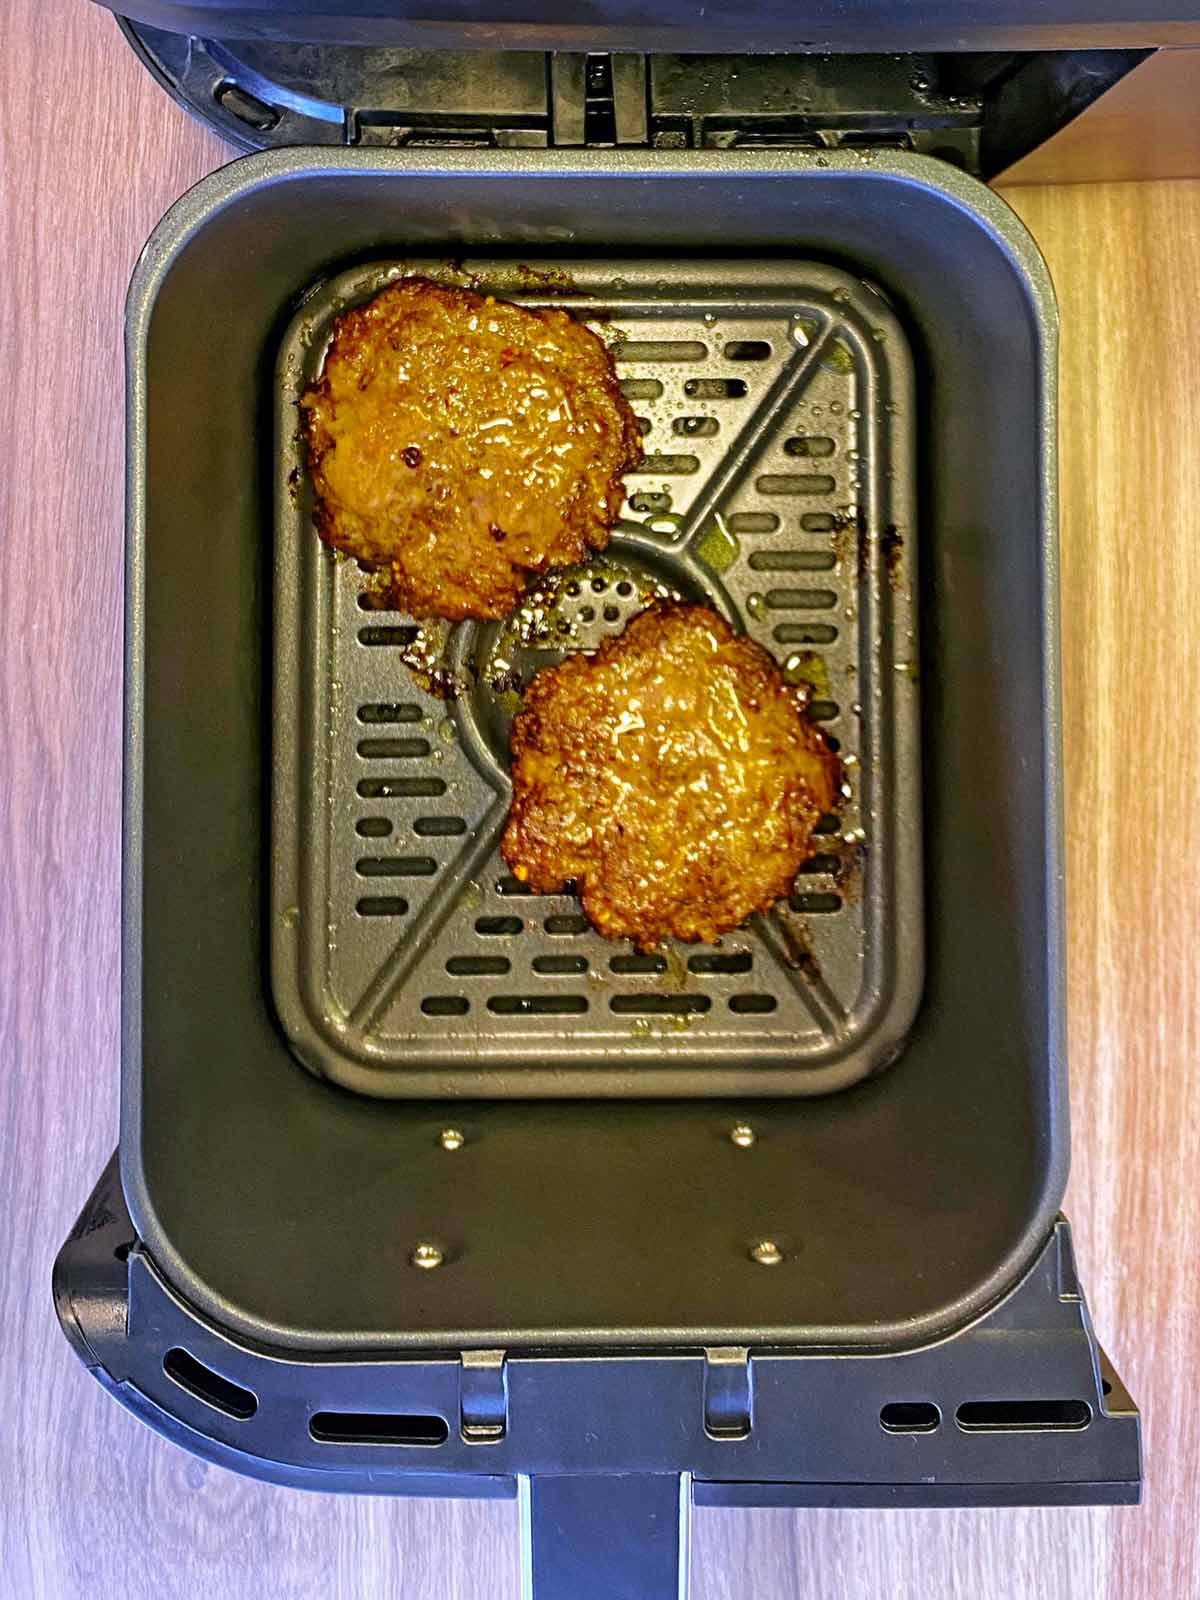 Cooked burgers in an air fryer basket.